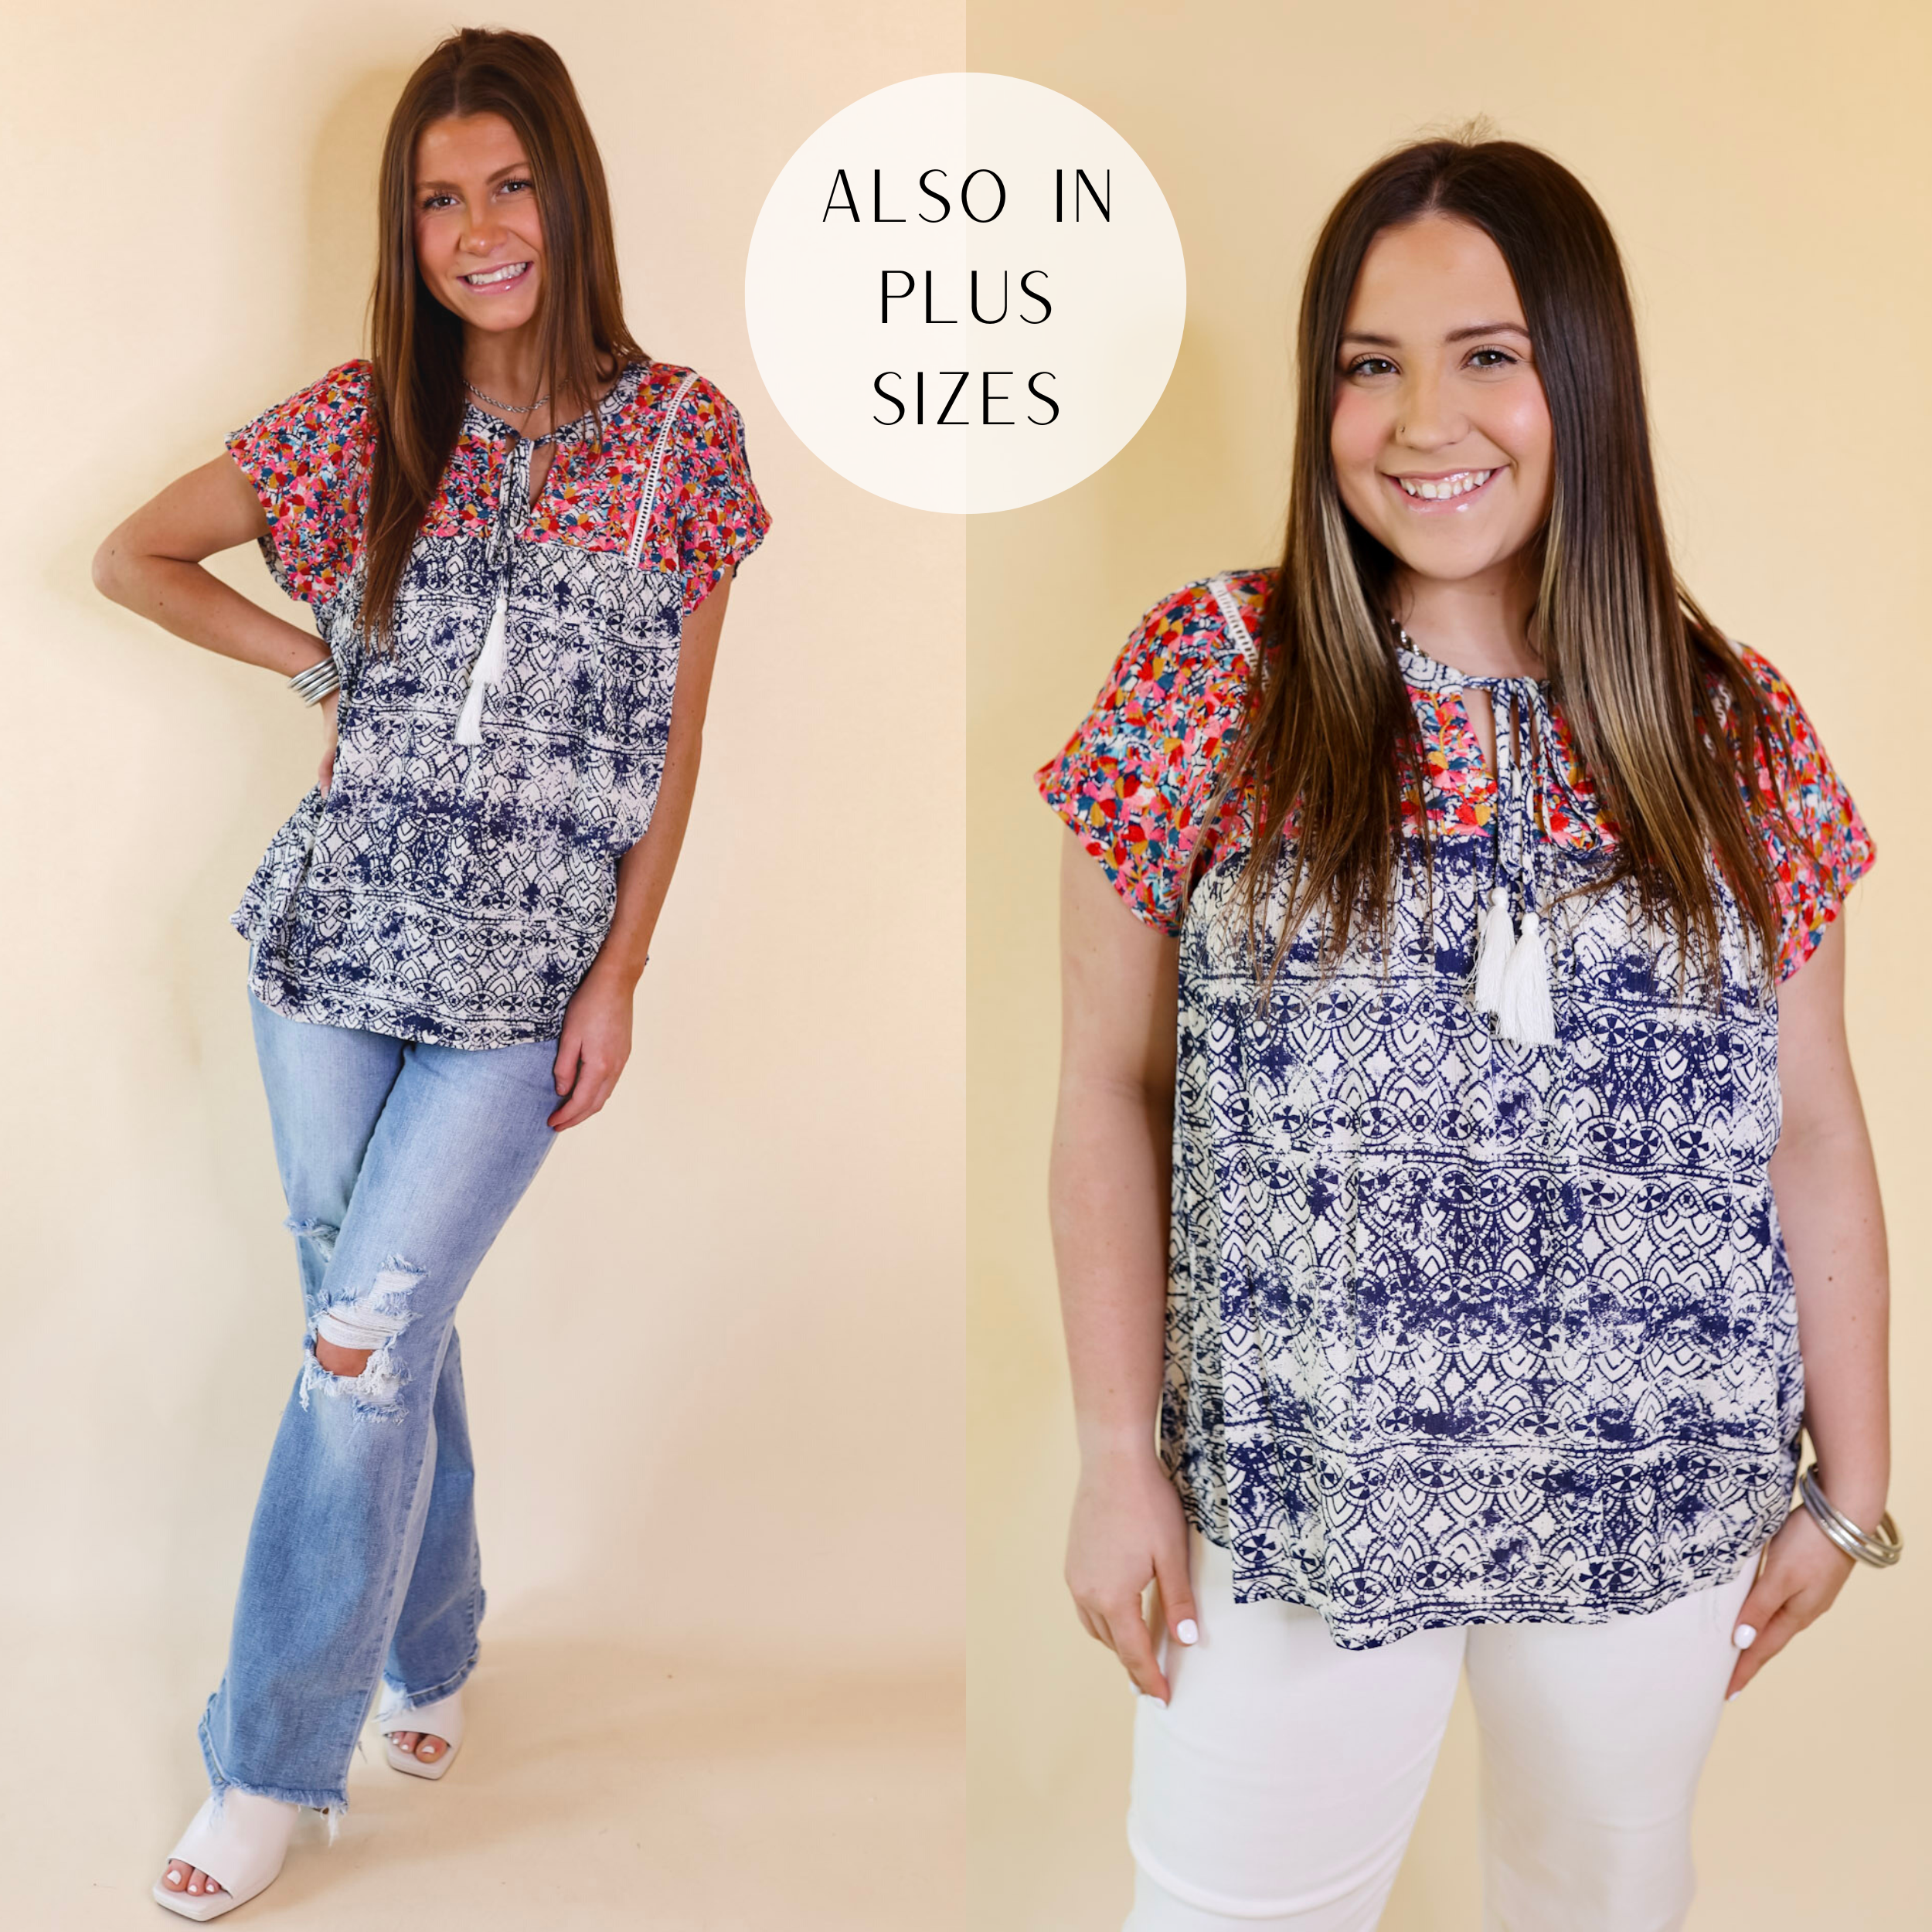 Models are wearing a navy blue and ivory print top with colorful embroidery and a keyhole at the front. Size small model has it paired with distressed light wash jeans, white heels, and silver jewelry. Size large model has it paired with white jeans and silver jewelry.